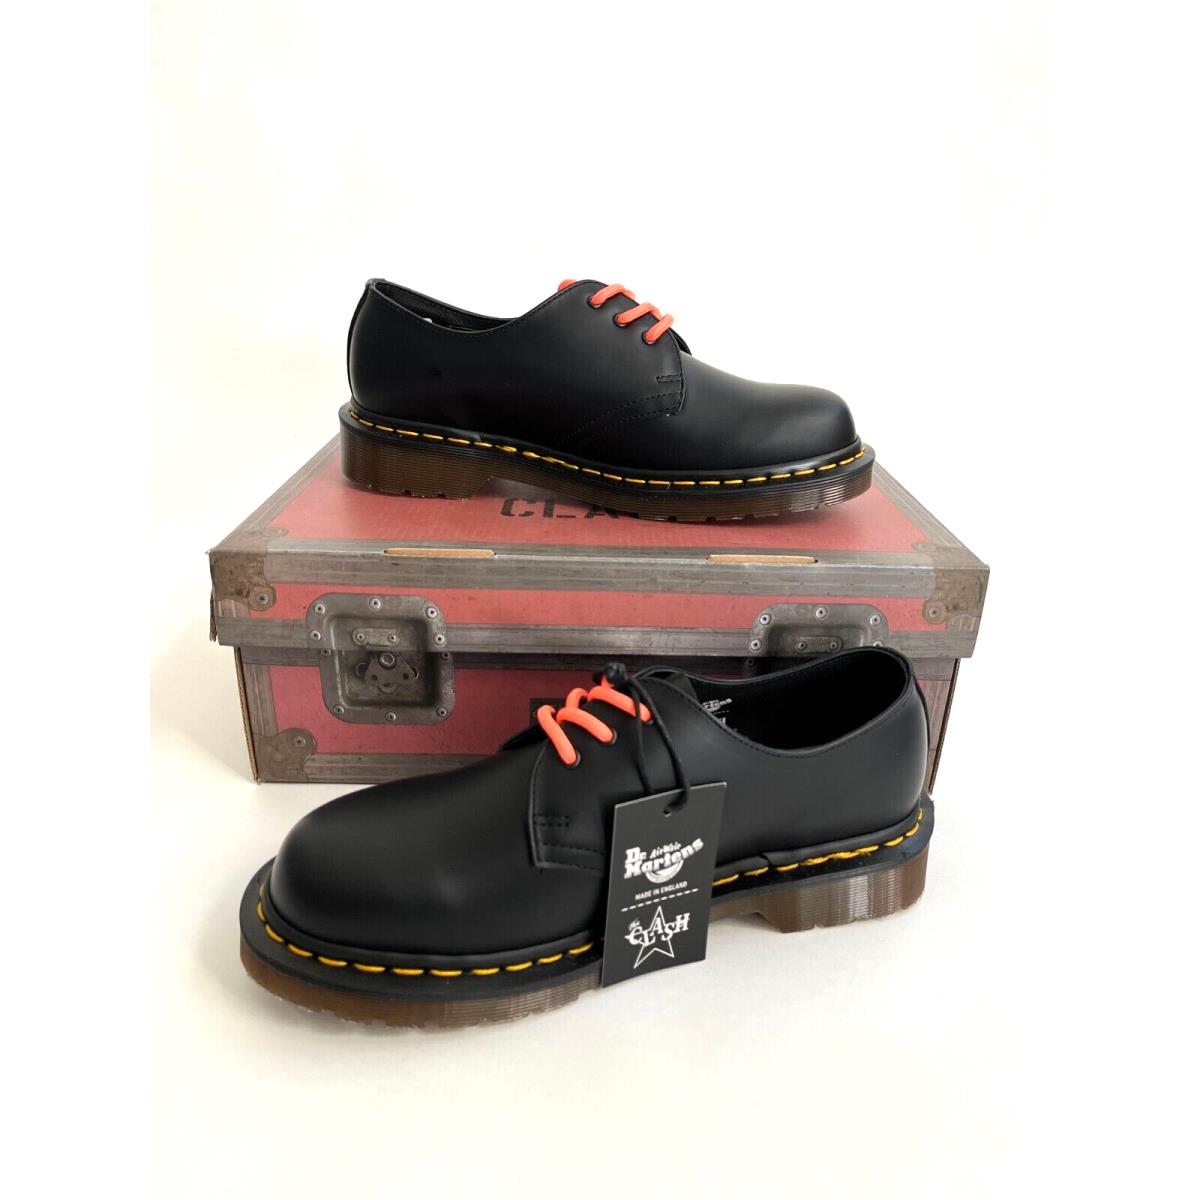 Dr. Martens Doc x The Clash 1461 Legacy Smooth Leather - Smooth Black - Sz US7